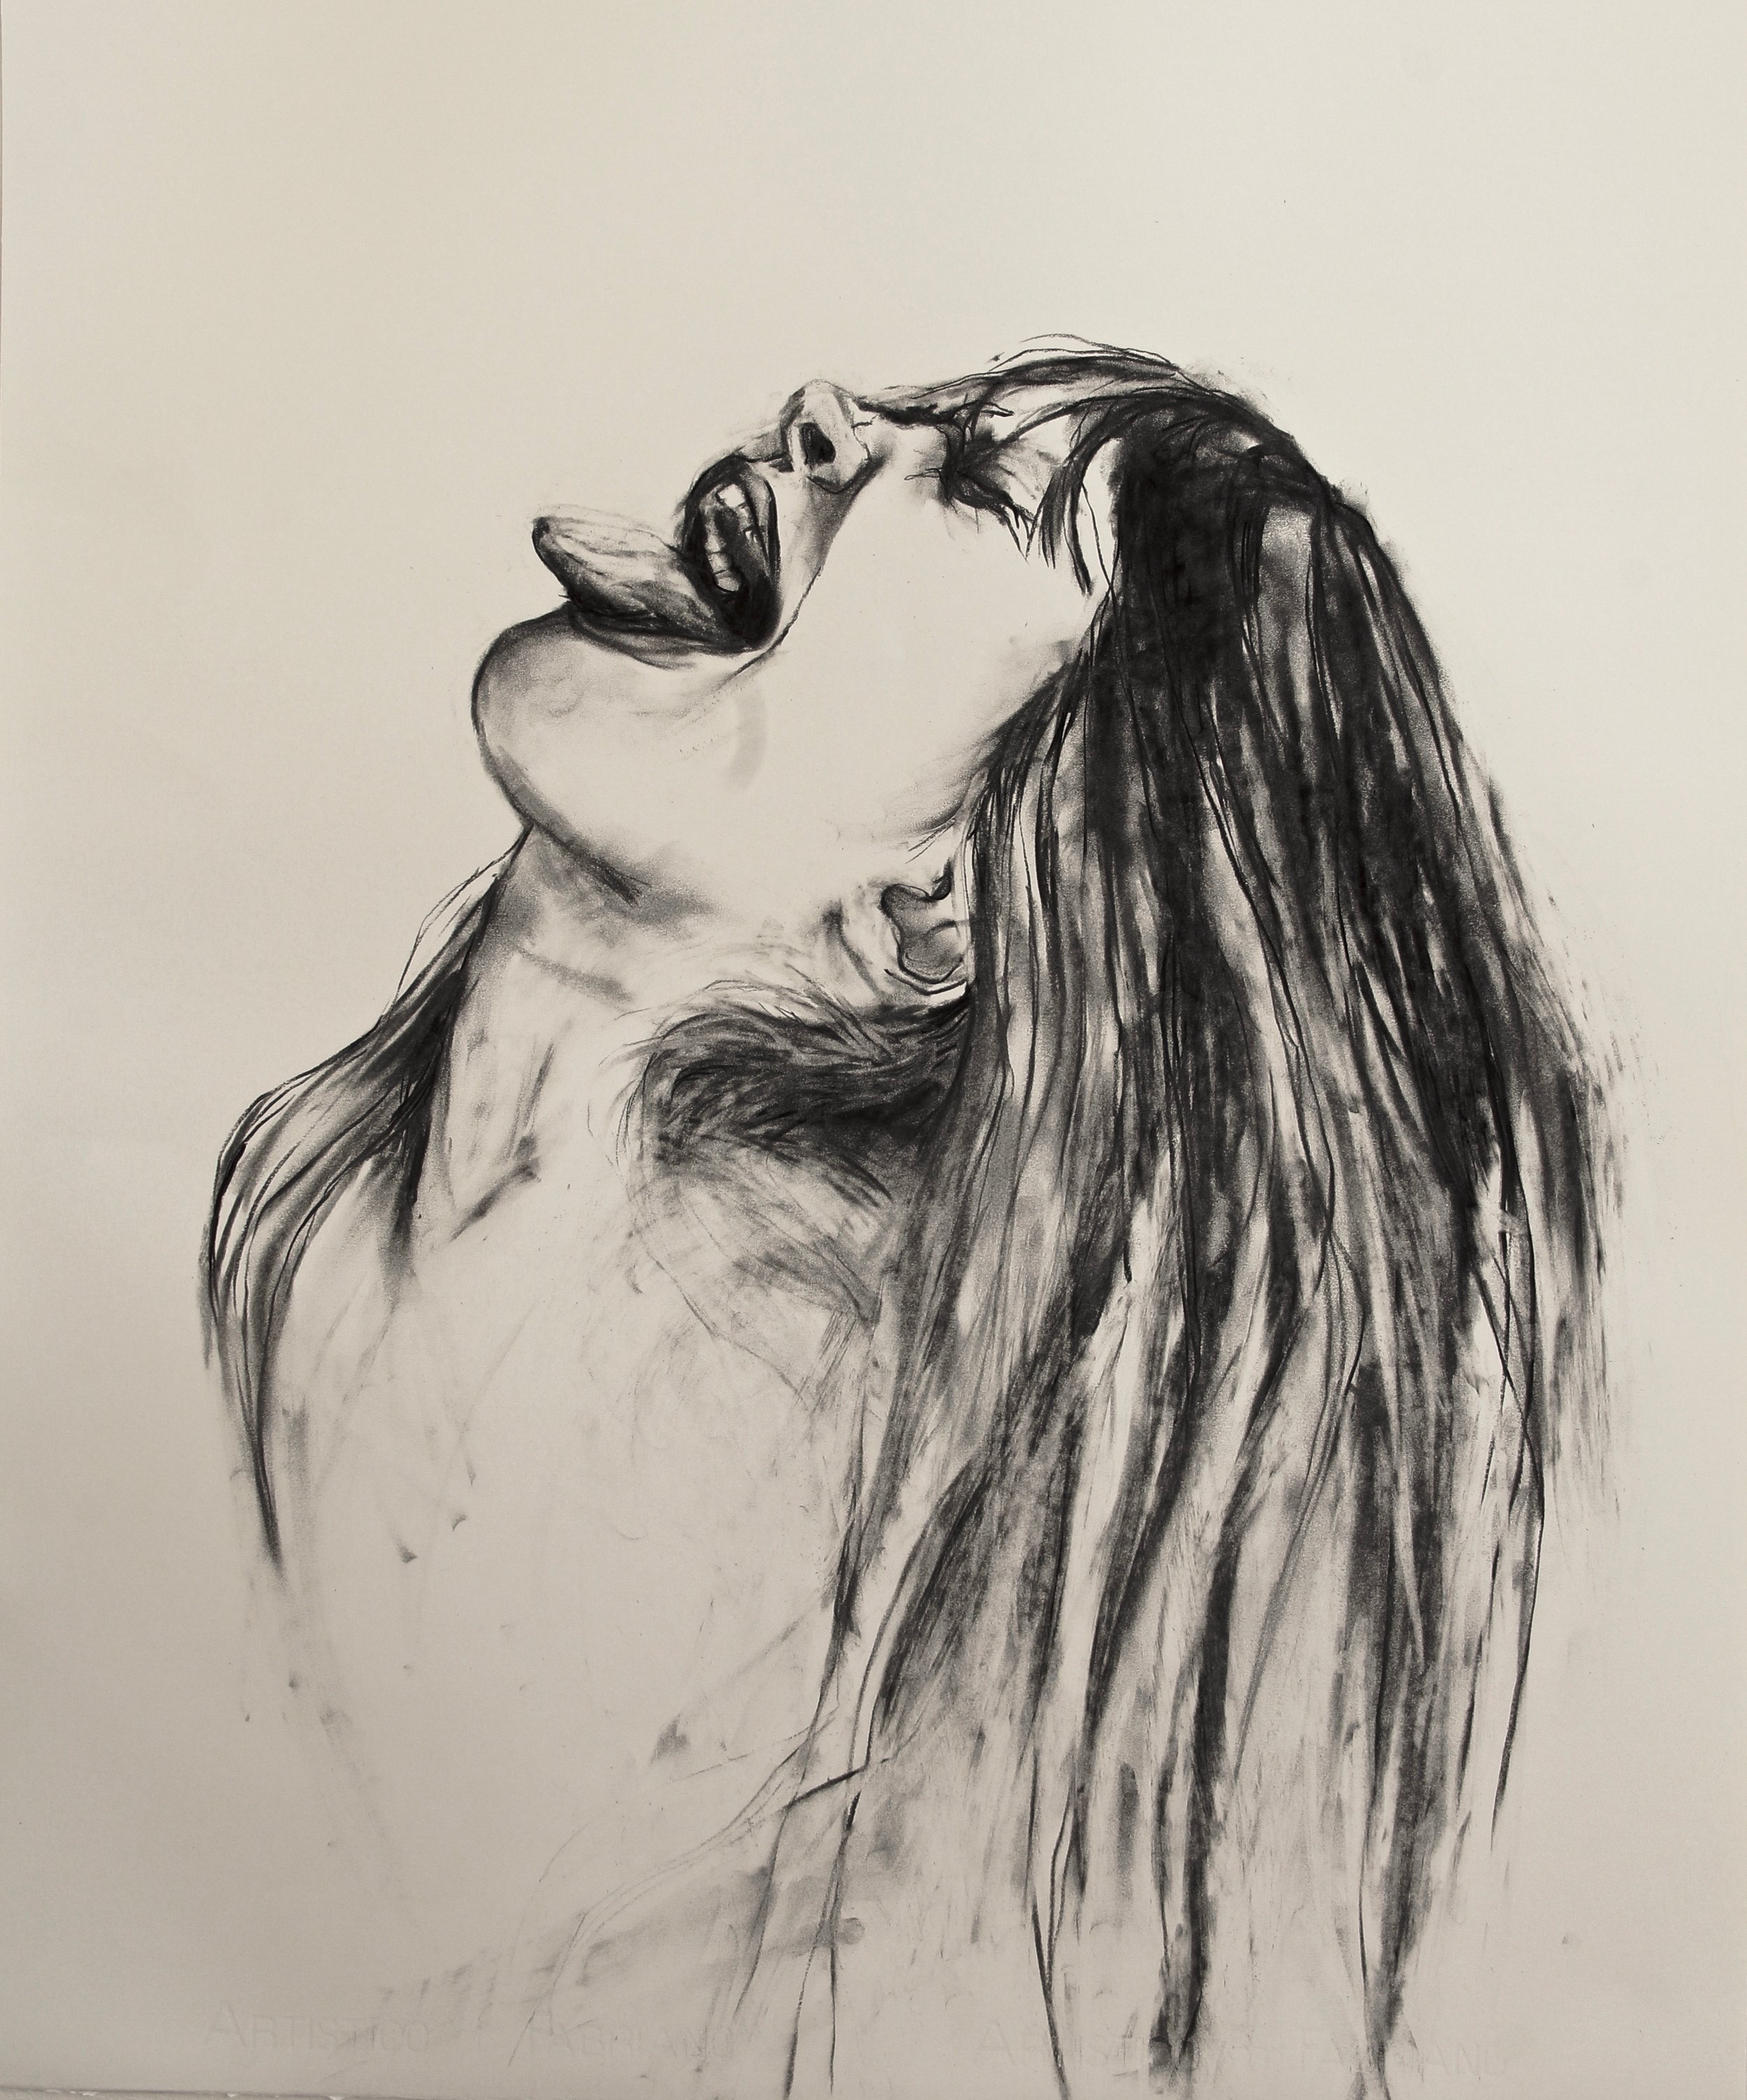  vessel.     charcoal on paper.  2015 